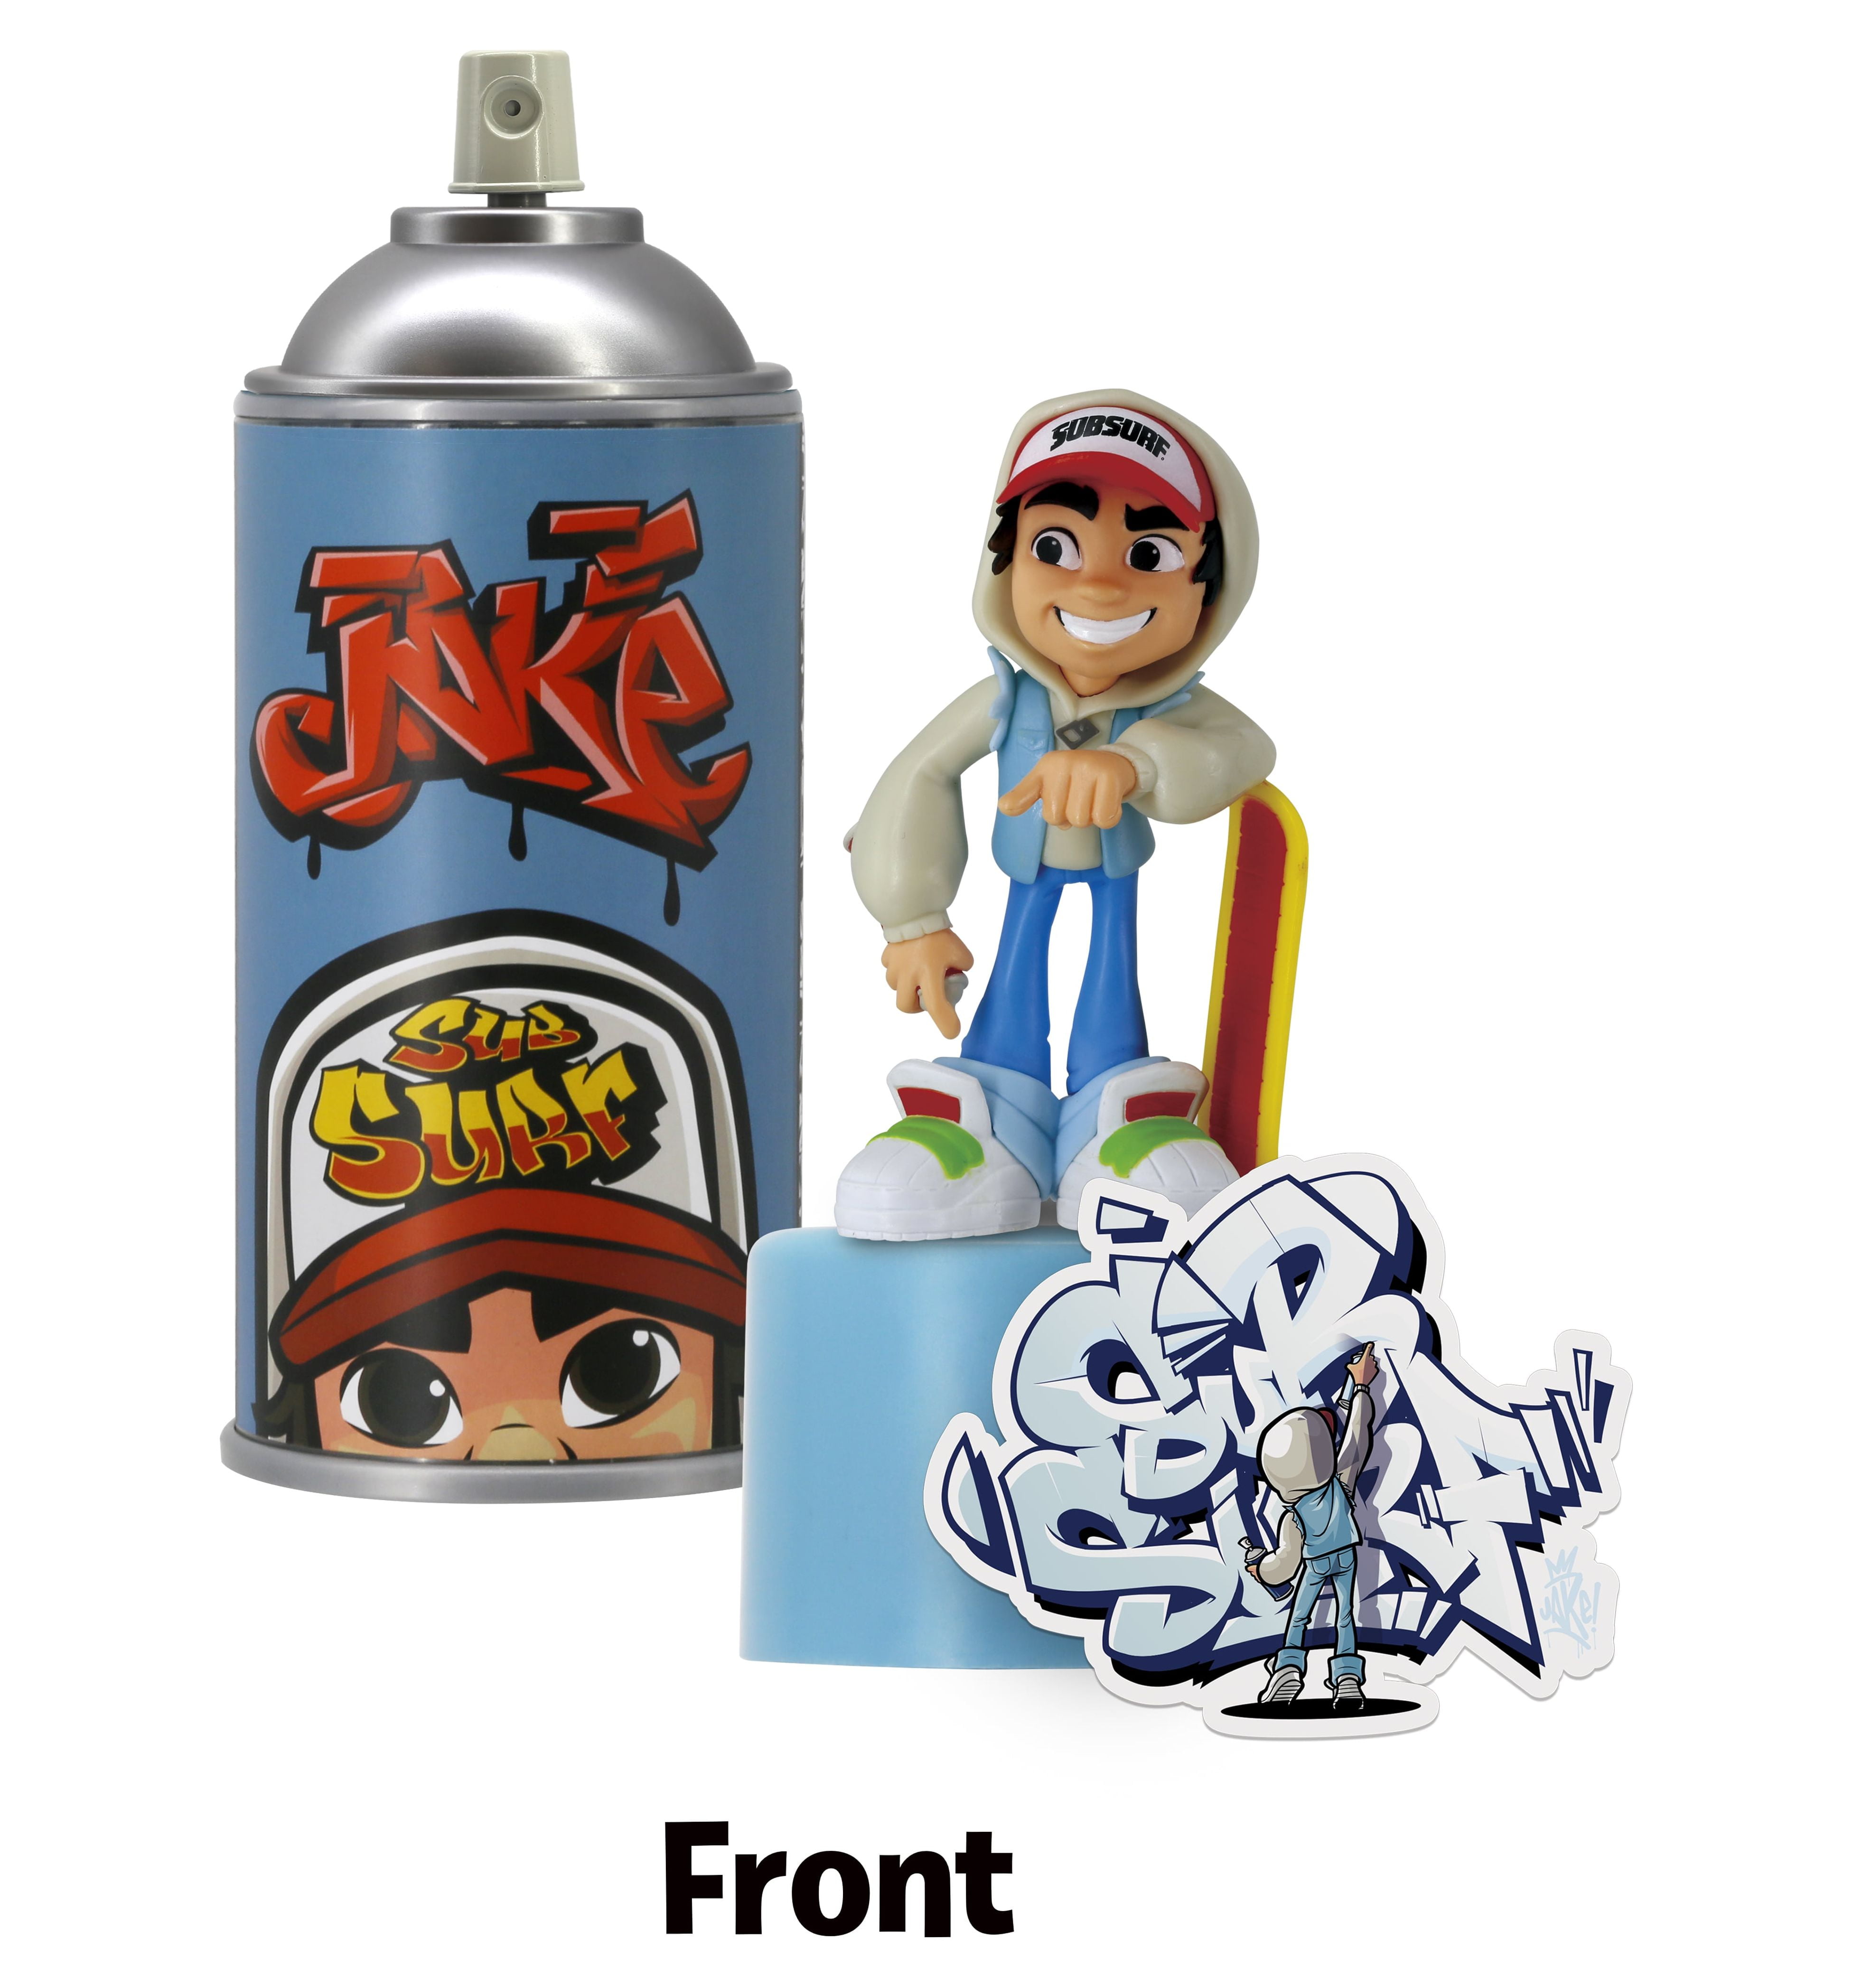 Subway Surfers Spray Crew Jake 4” Figure 01731 – Cove Toy House